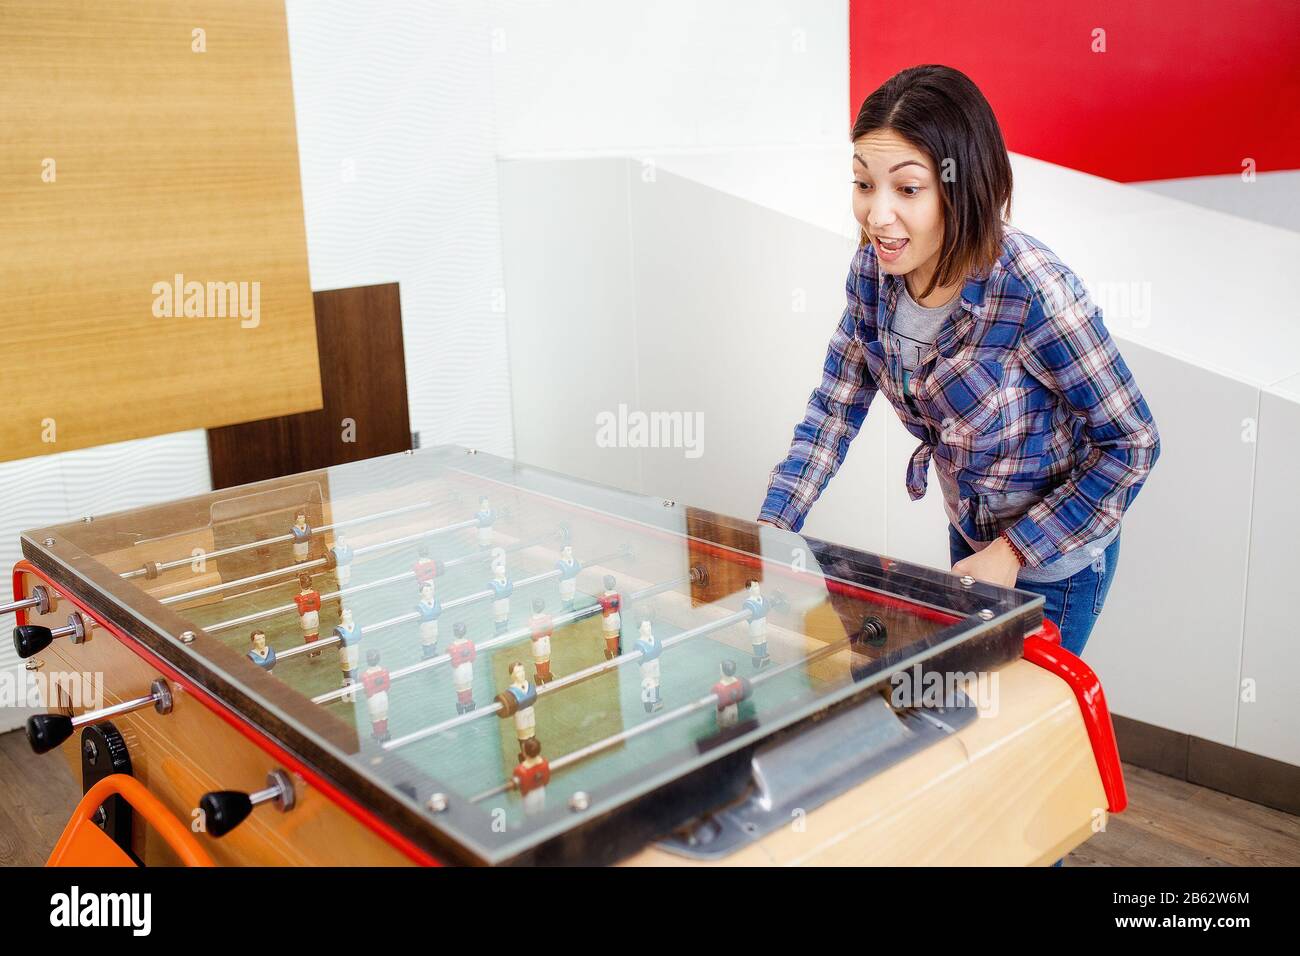 Two happy women friends playing table football at leisure time Stock Photo